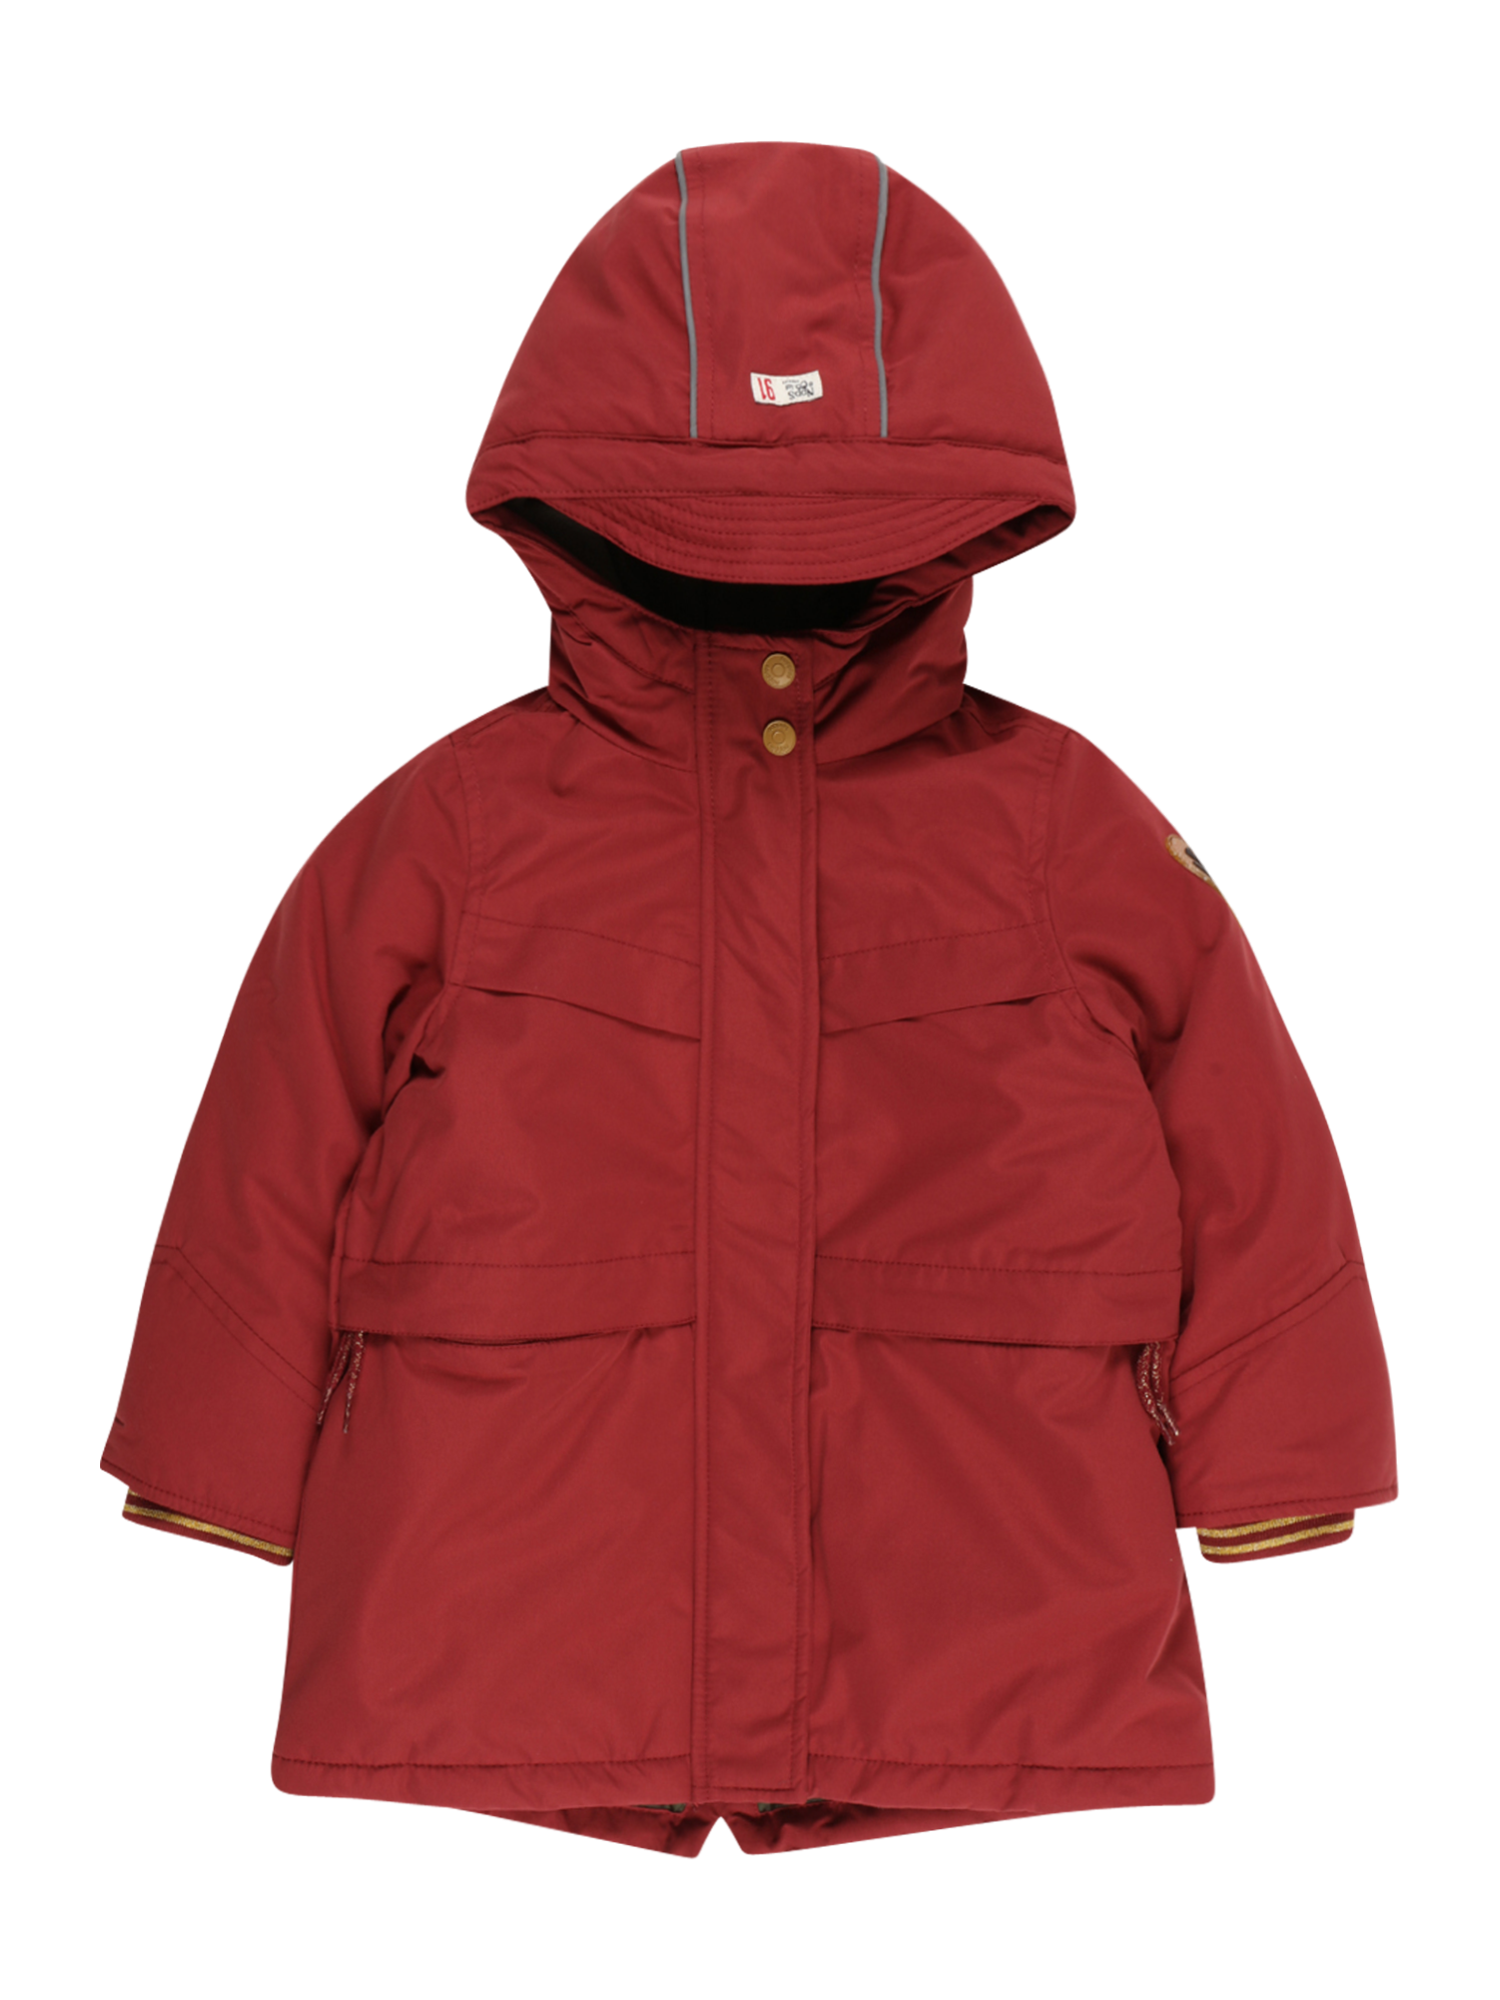 SQynR Bimba Noppies Giacca invernale in Rosso 